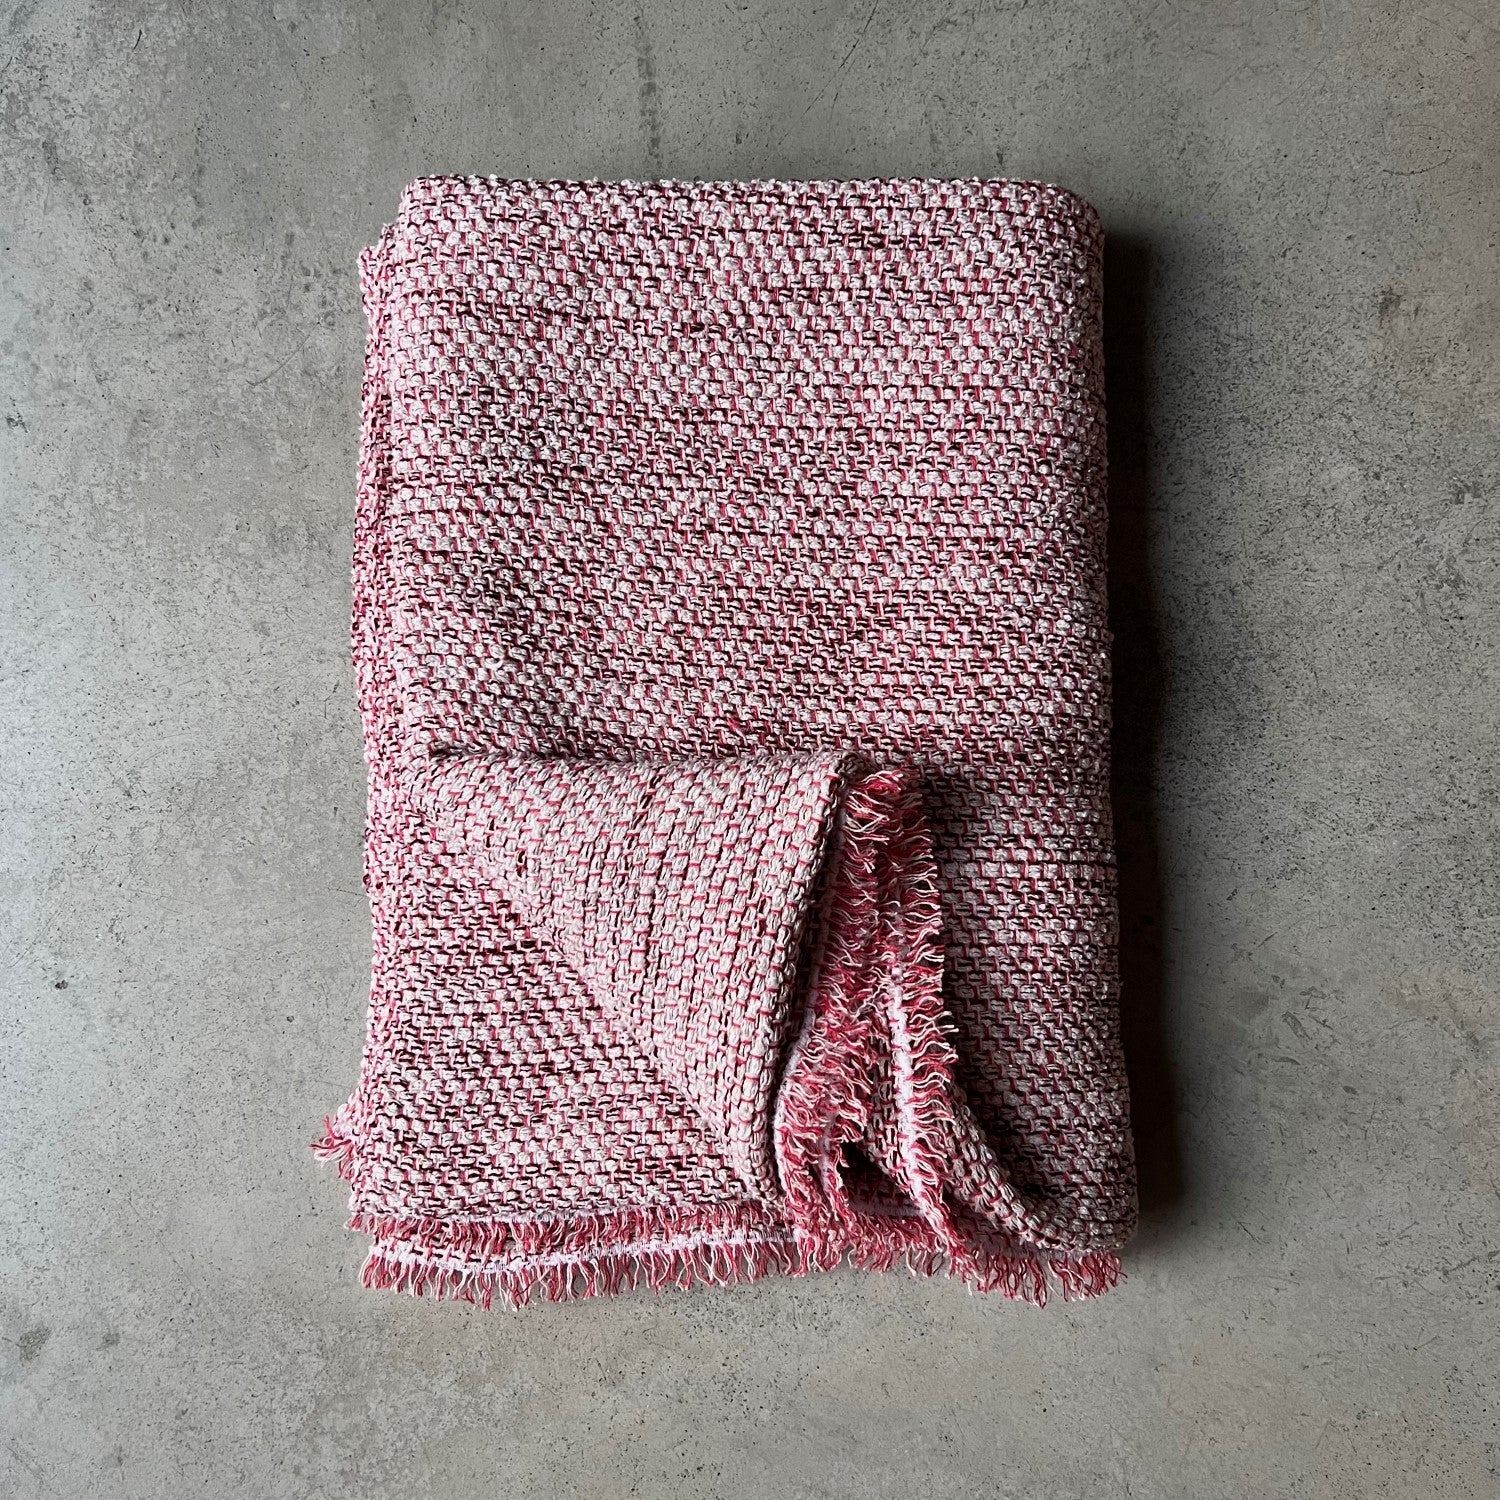 Handwoven boucle linen throw in red and white with slight shine 125x180 cm